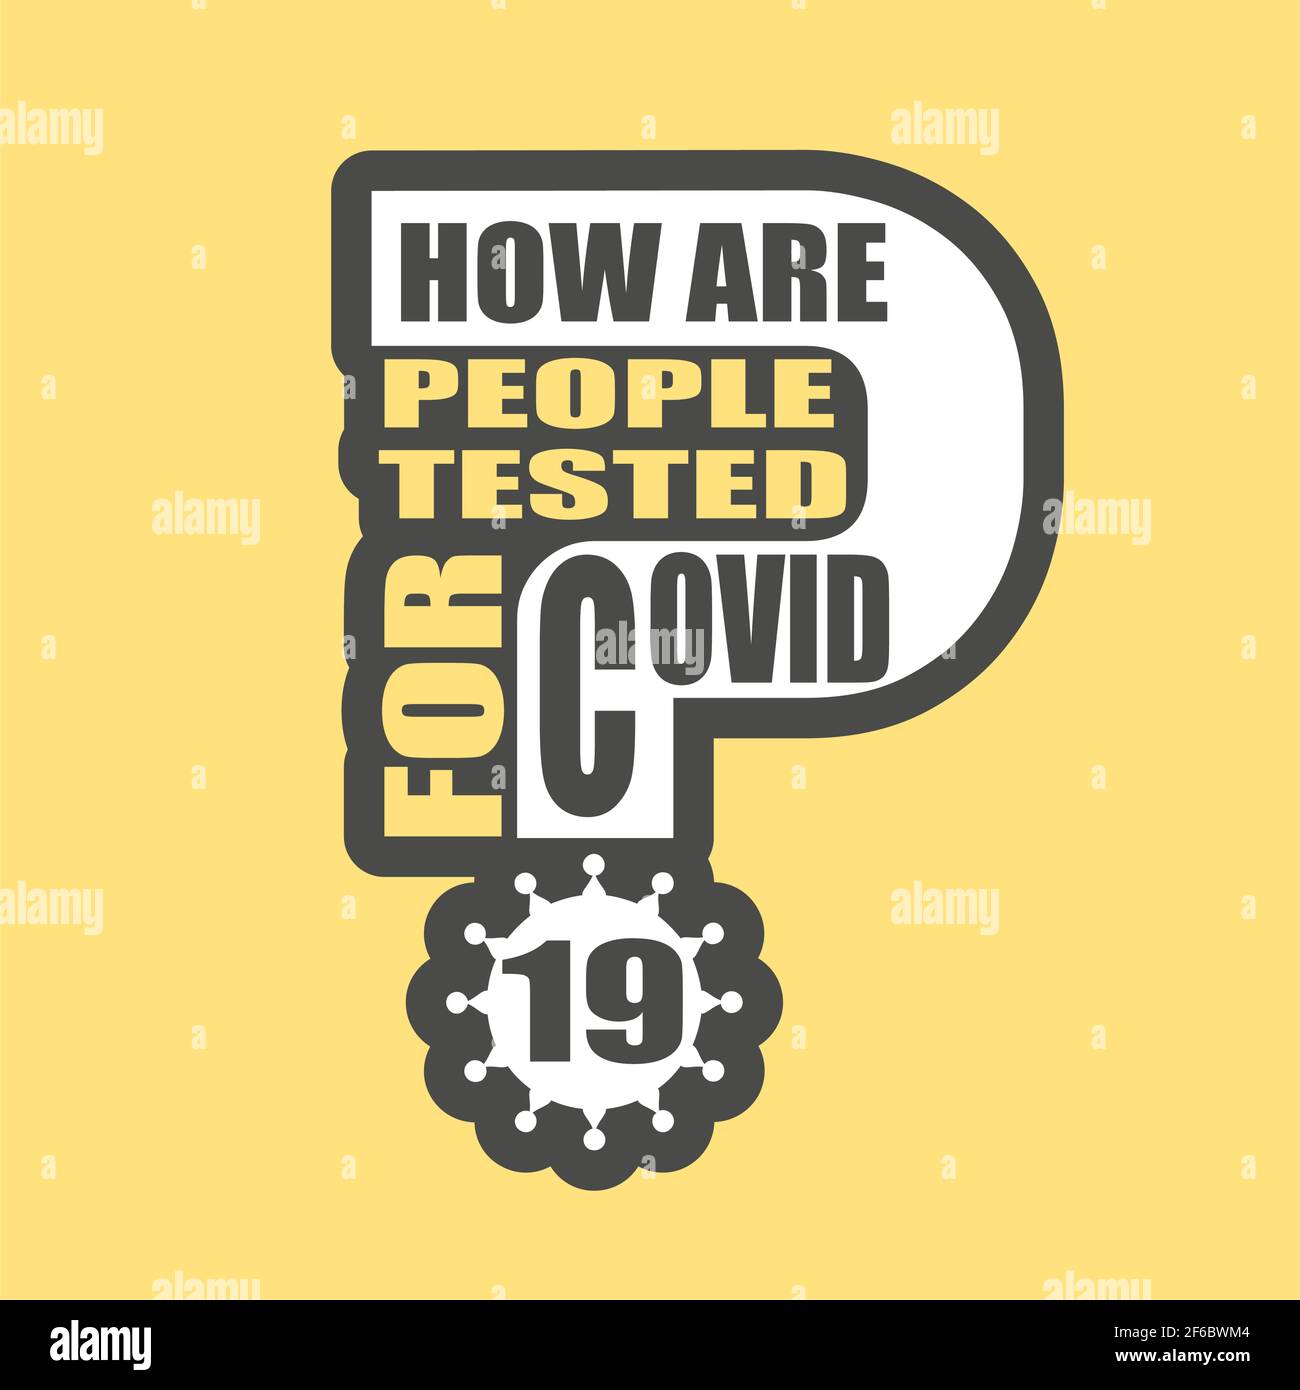 How are people tested for Covid 19 question. Medical education relative illustration. Scientific medical designs. Virus diseases relative theme. Stock Vector